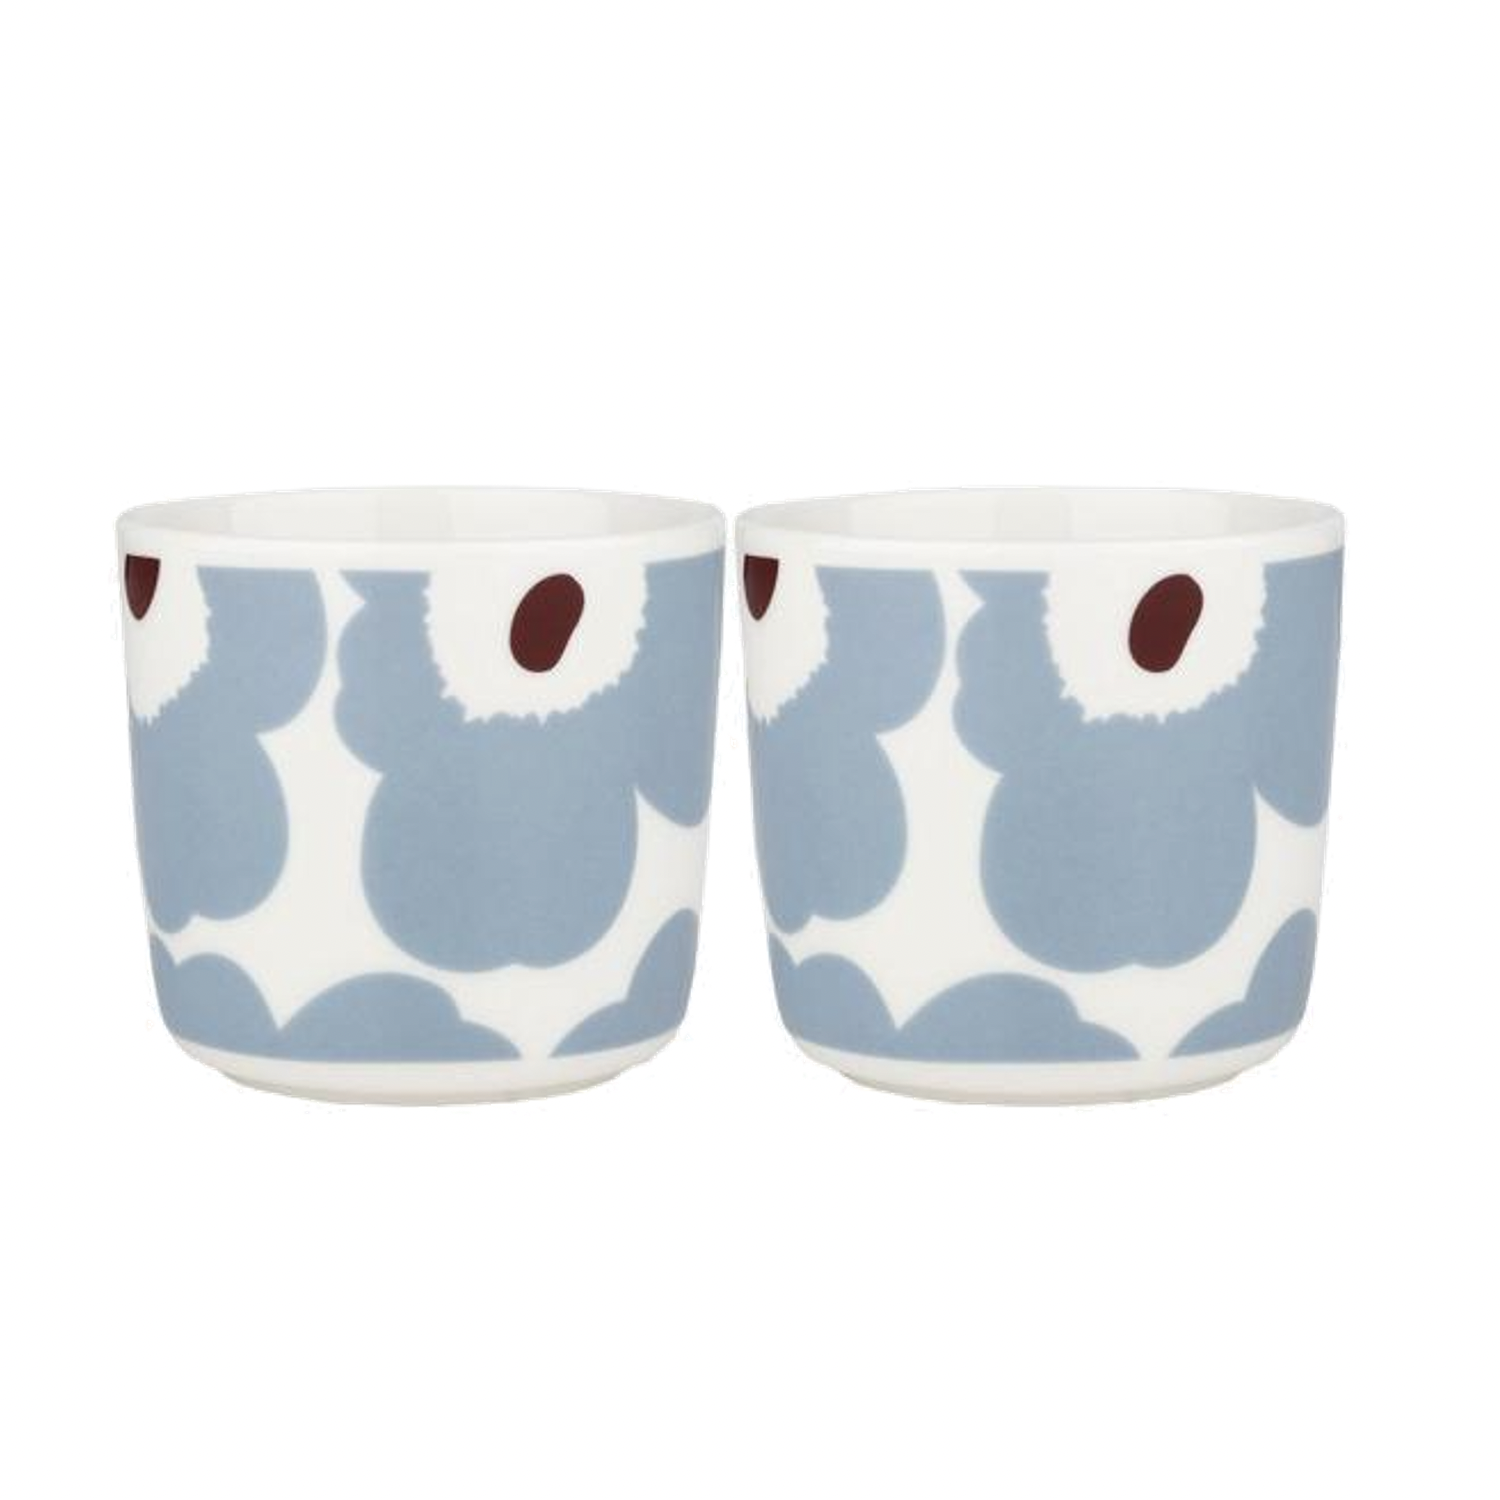 CUP - OIVA / UNIKKO COFFEE CUP 2DL, WITHOUT HANDLE, 2 PCS - MARIMEKKO -  Homey Home Interiors